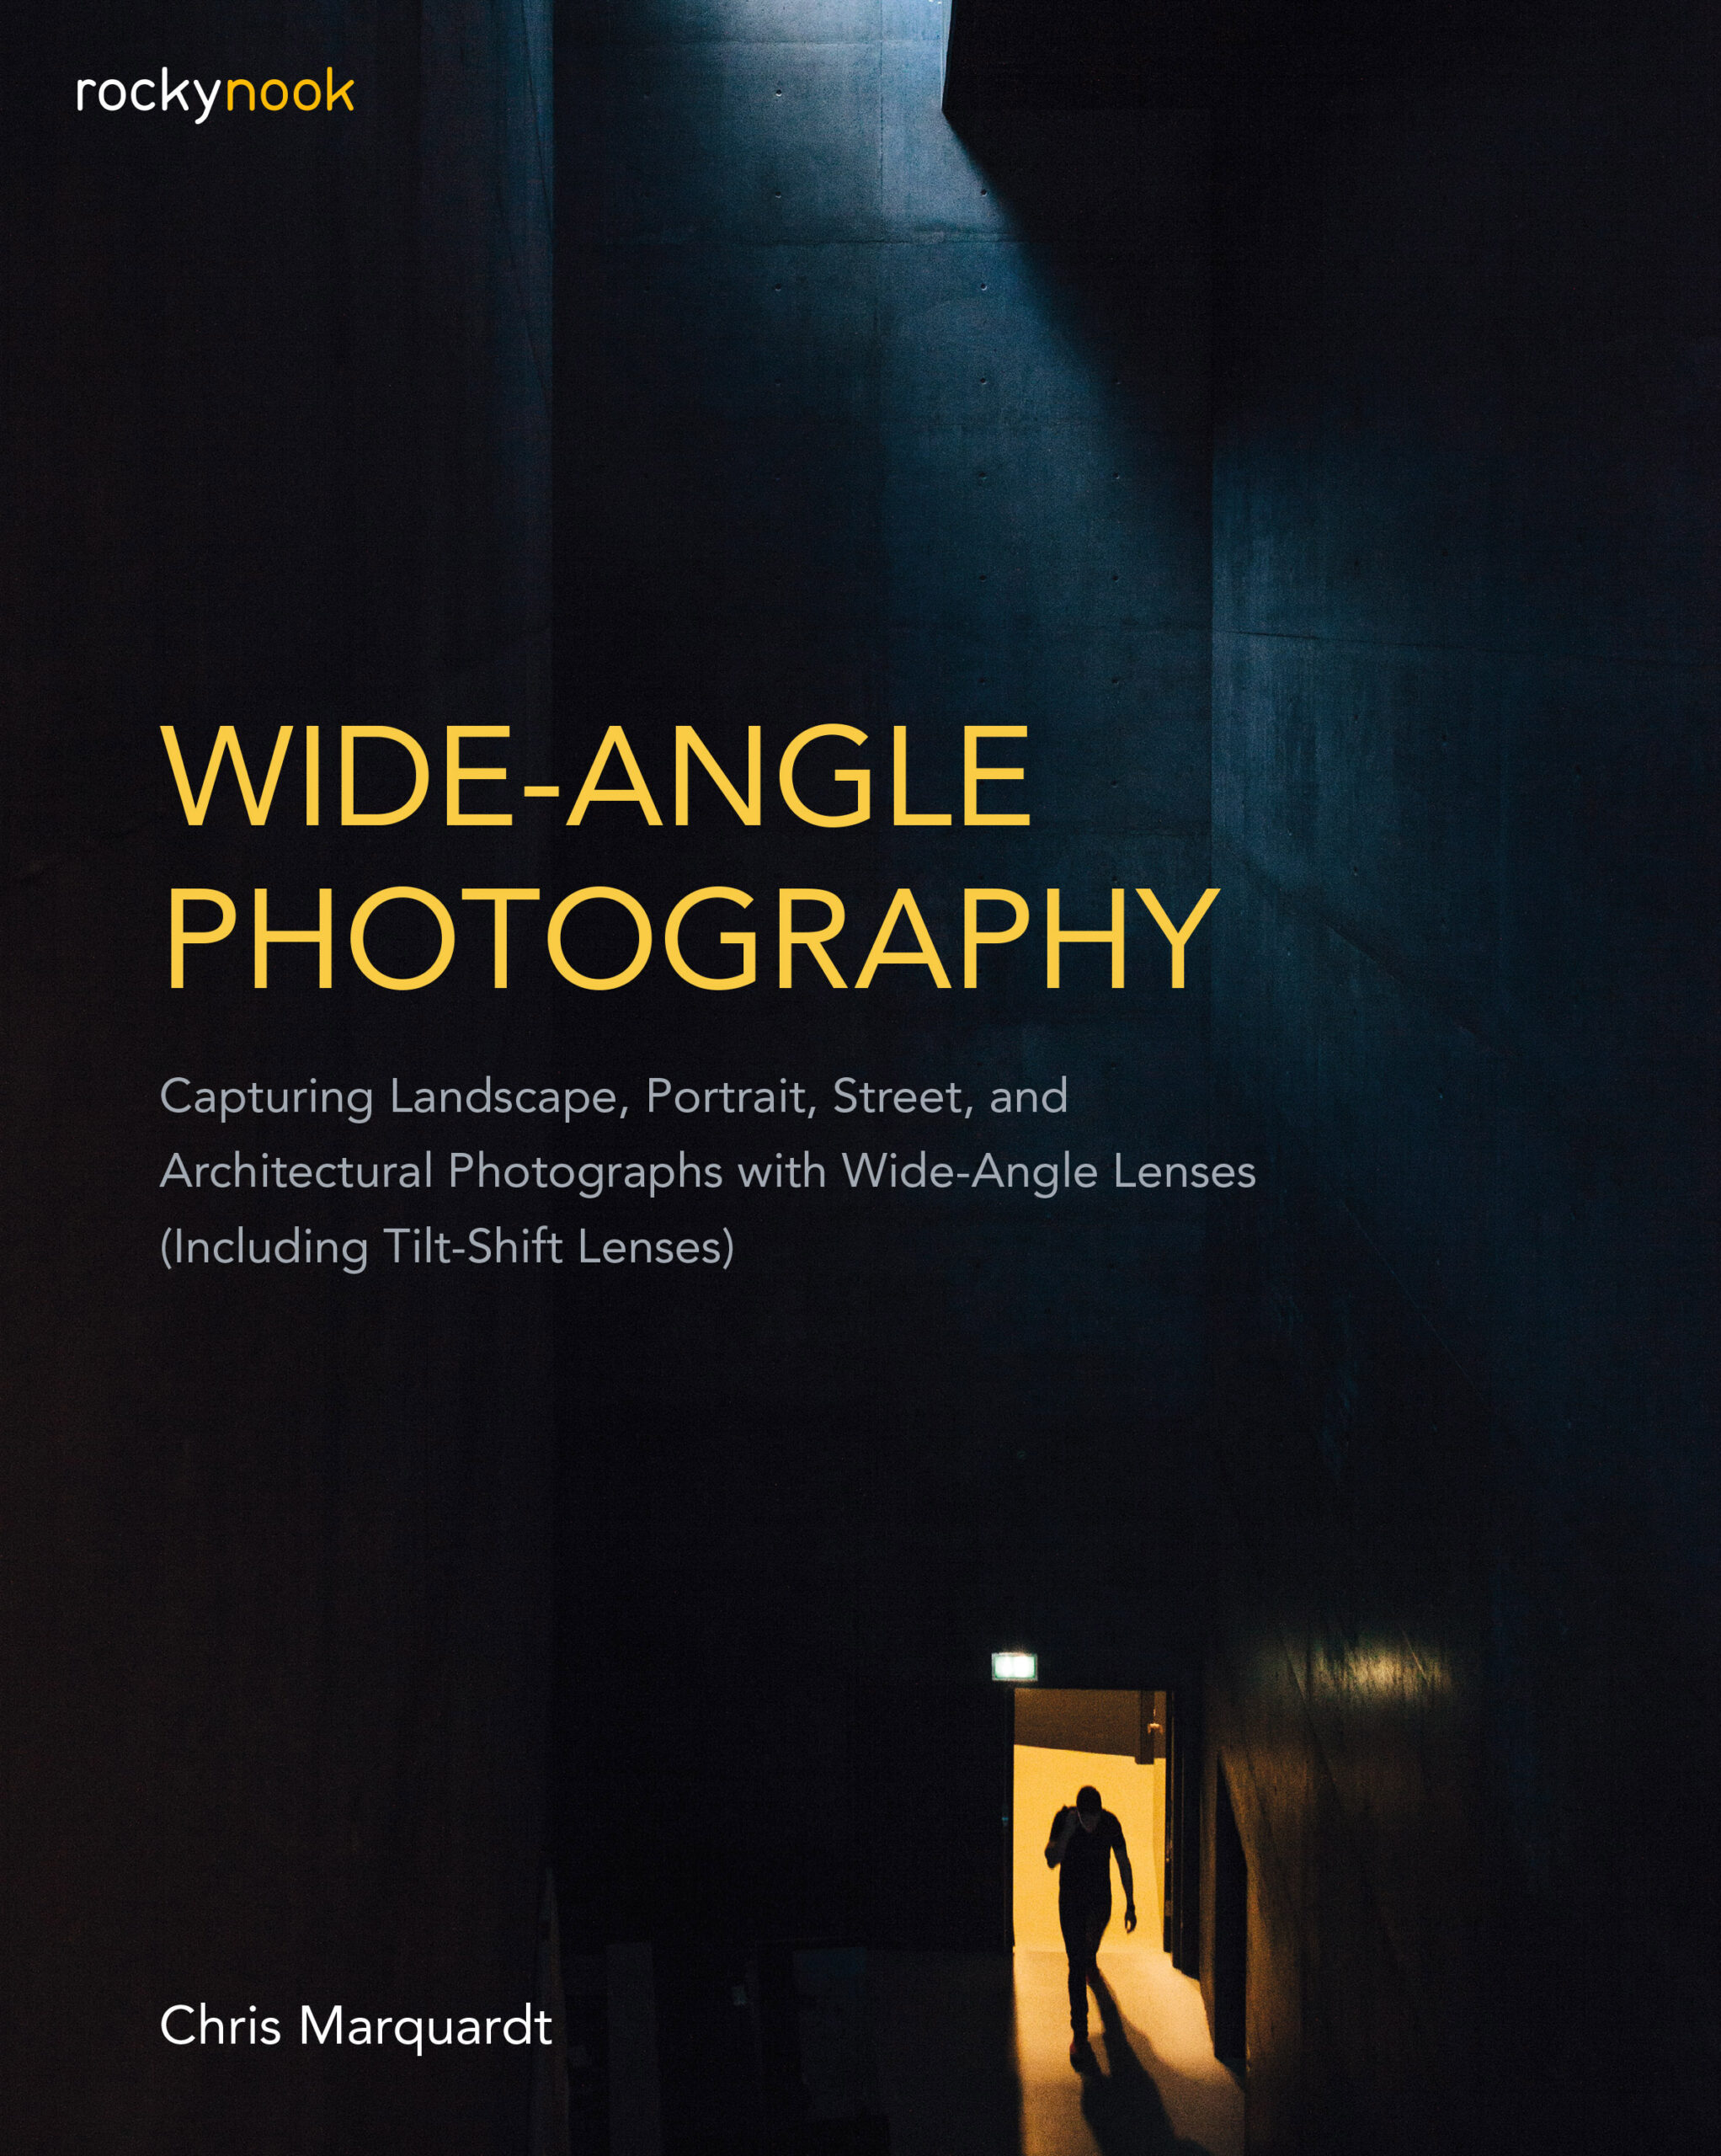 Wide-Angle Photography Cover_R3.indd